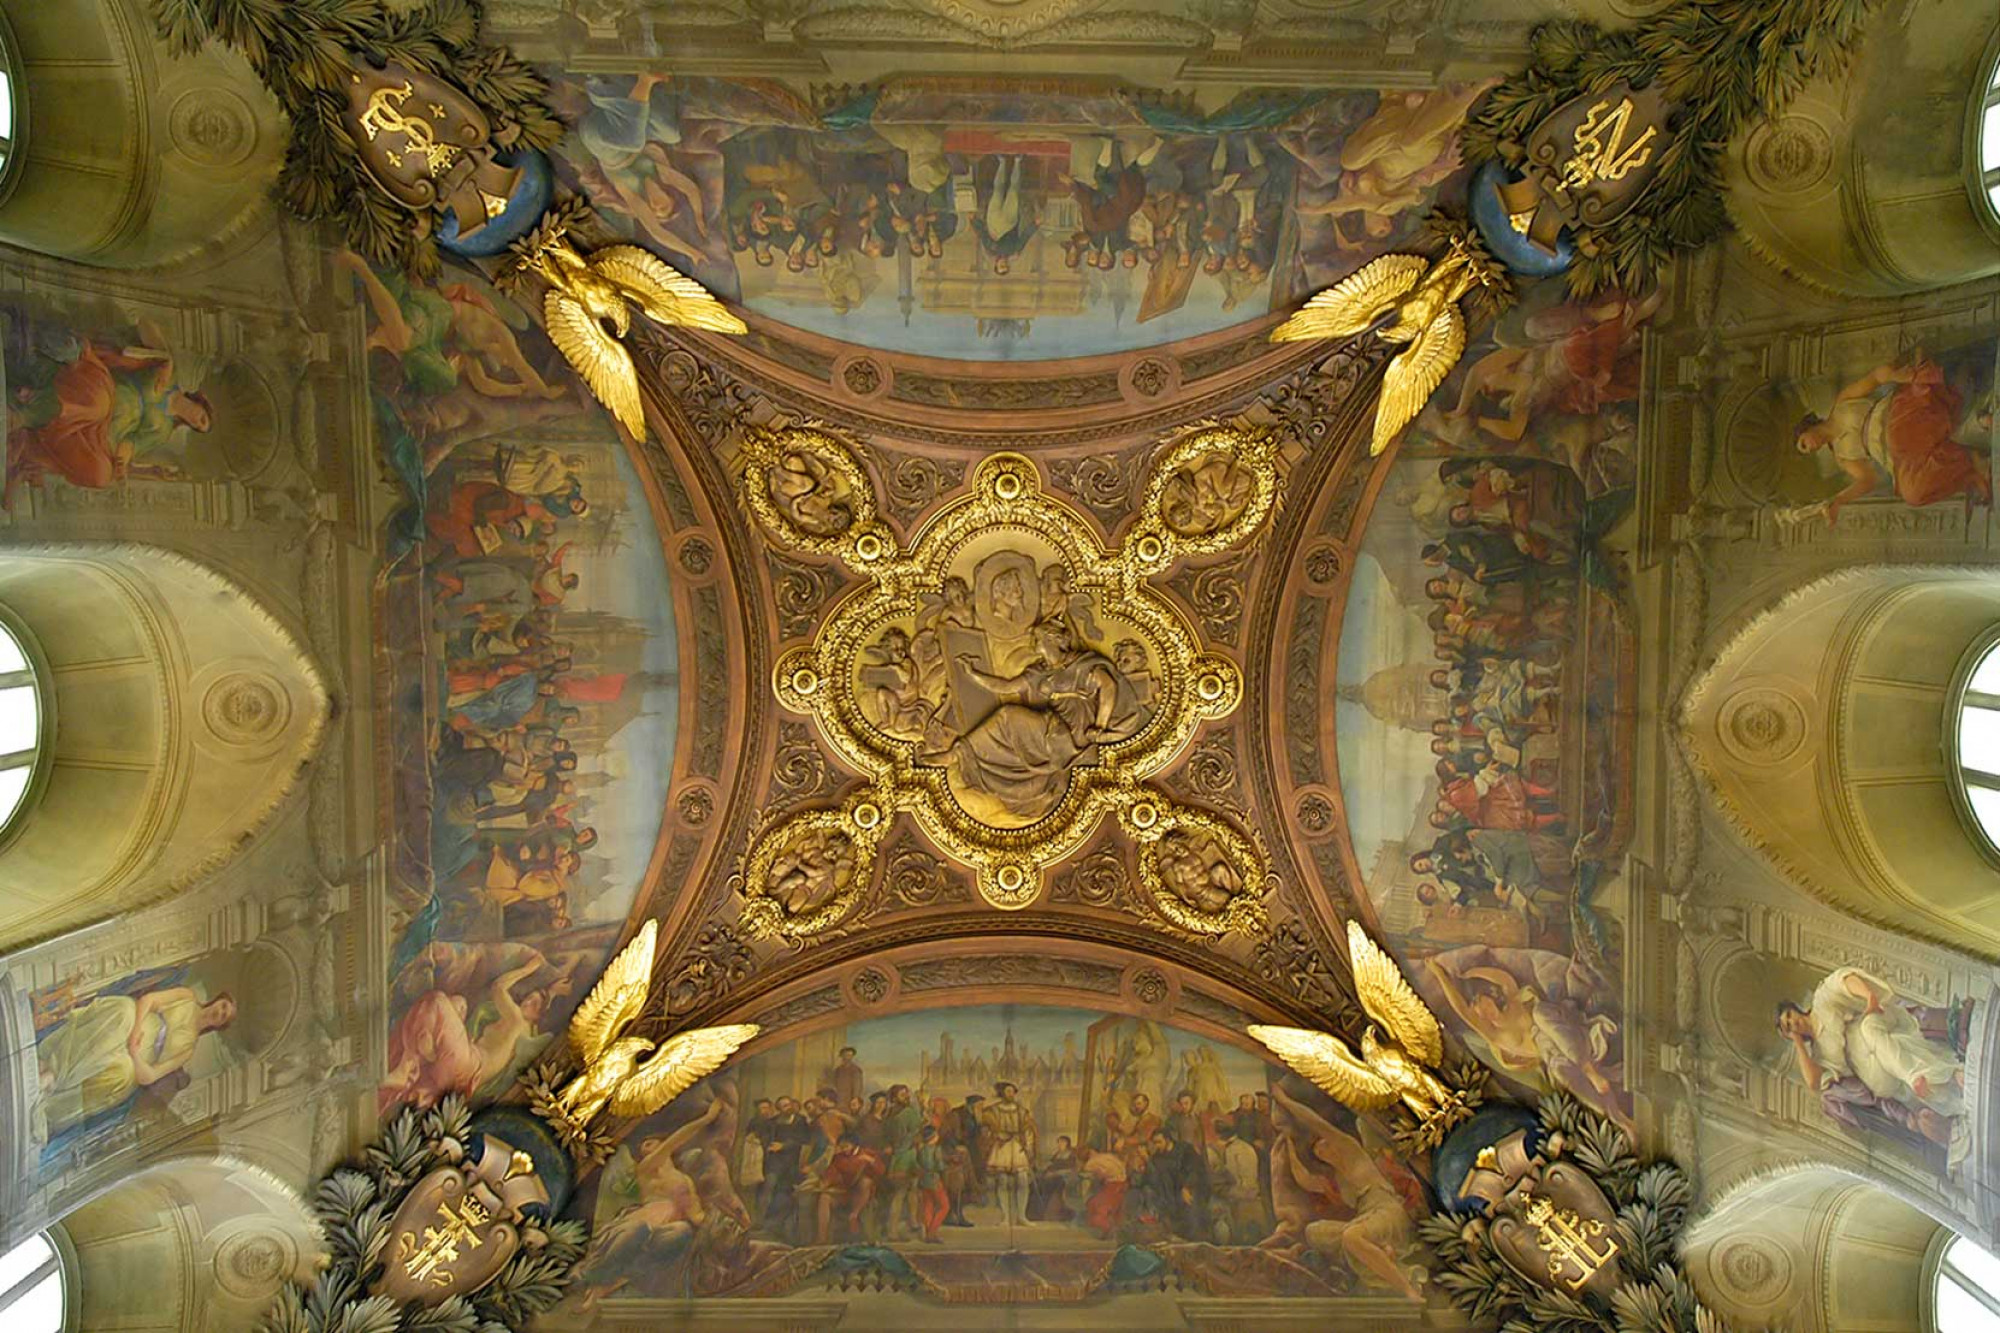 gold embellished ceiling in the Louvre